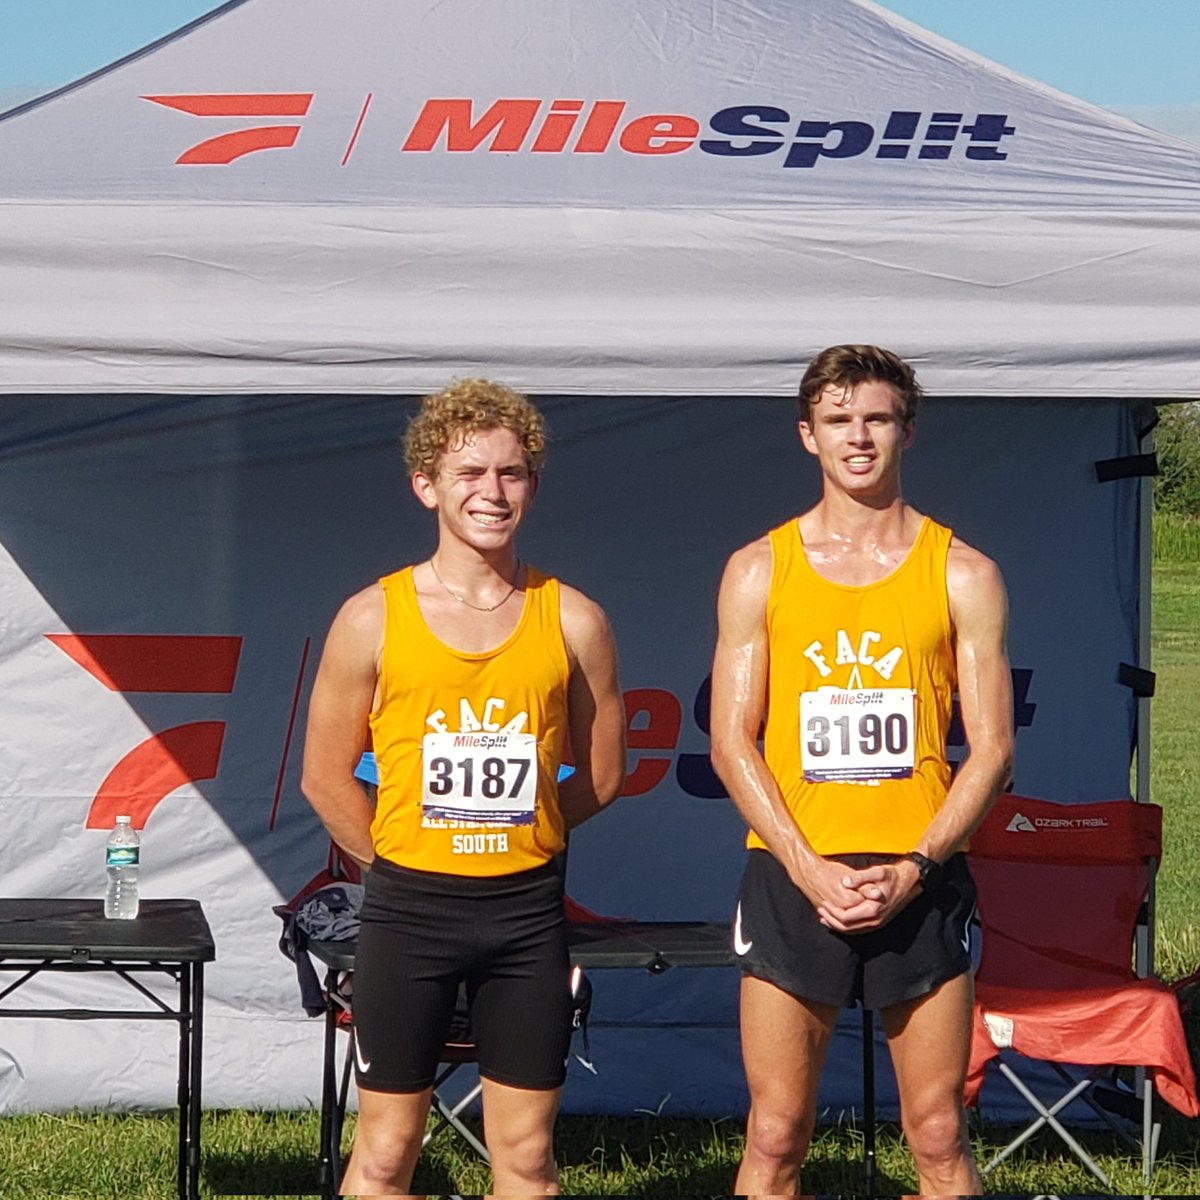 @coltonlawsonn posts 16:02.02, 2nd place, &  Michael Castillo a 17:24.94, 14th overall, 2nd for the South Team, lead South Team to a team 2nd place! Well done South! @TKALions @wjmxccoach @flmilesplit @flrunners